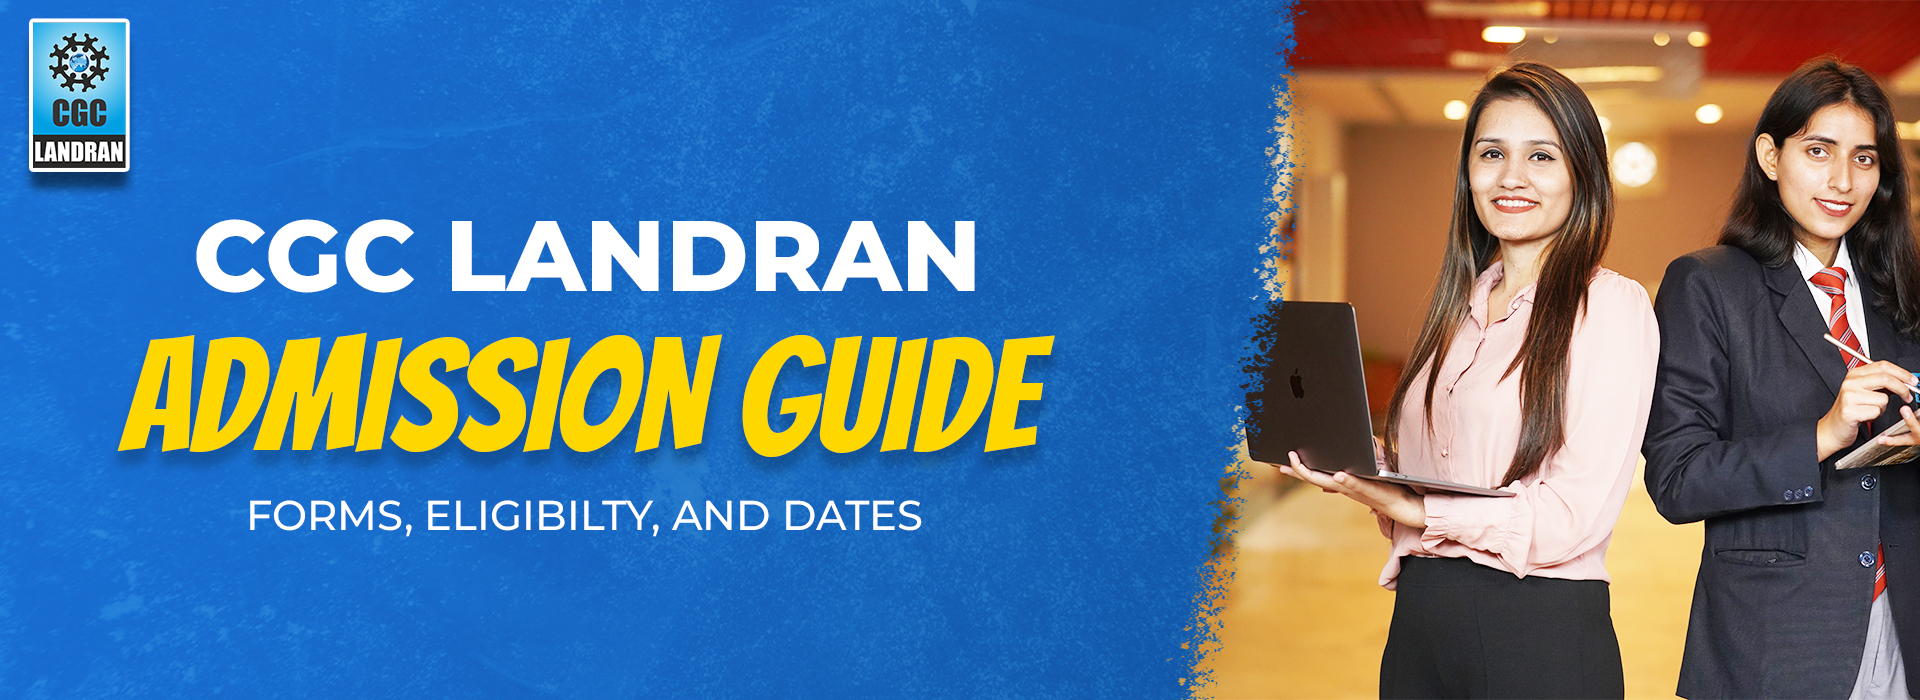 CGC Landran Admission Guide: Forms, Eligibility, and Dates 